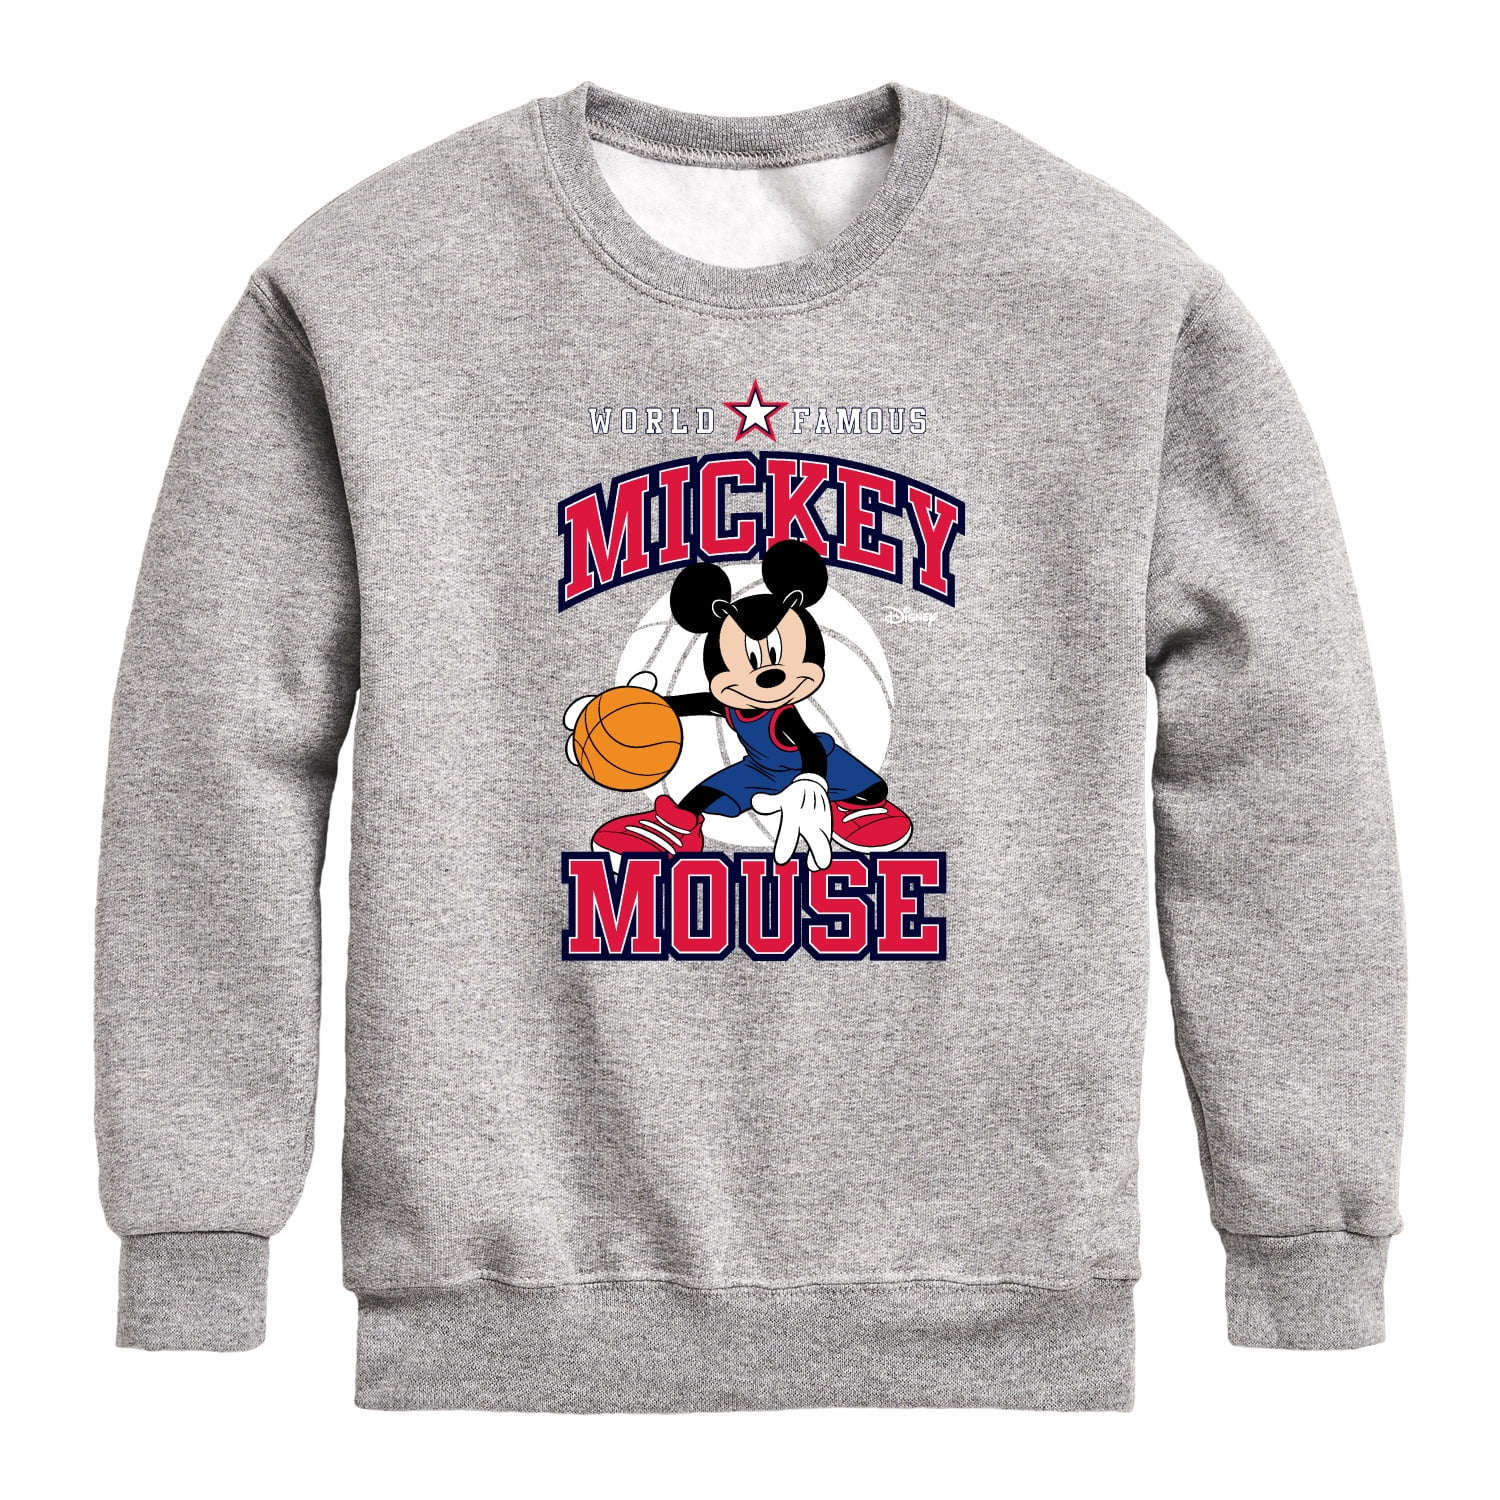 Disney - Mickey Basketball Jersey - Toddler And Youth Crewneck